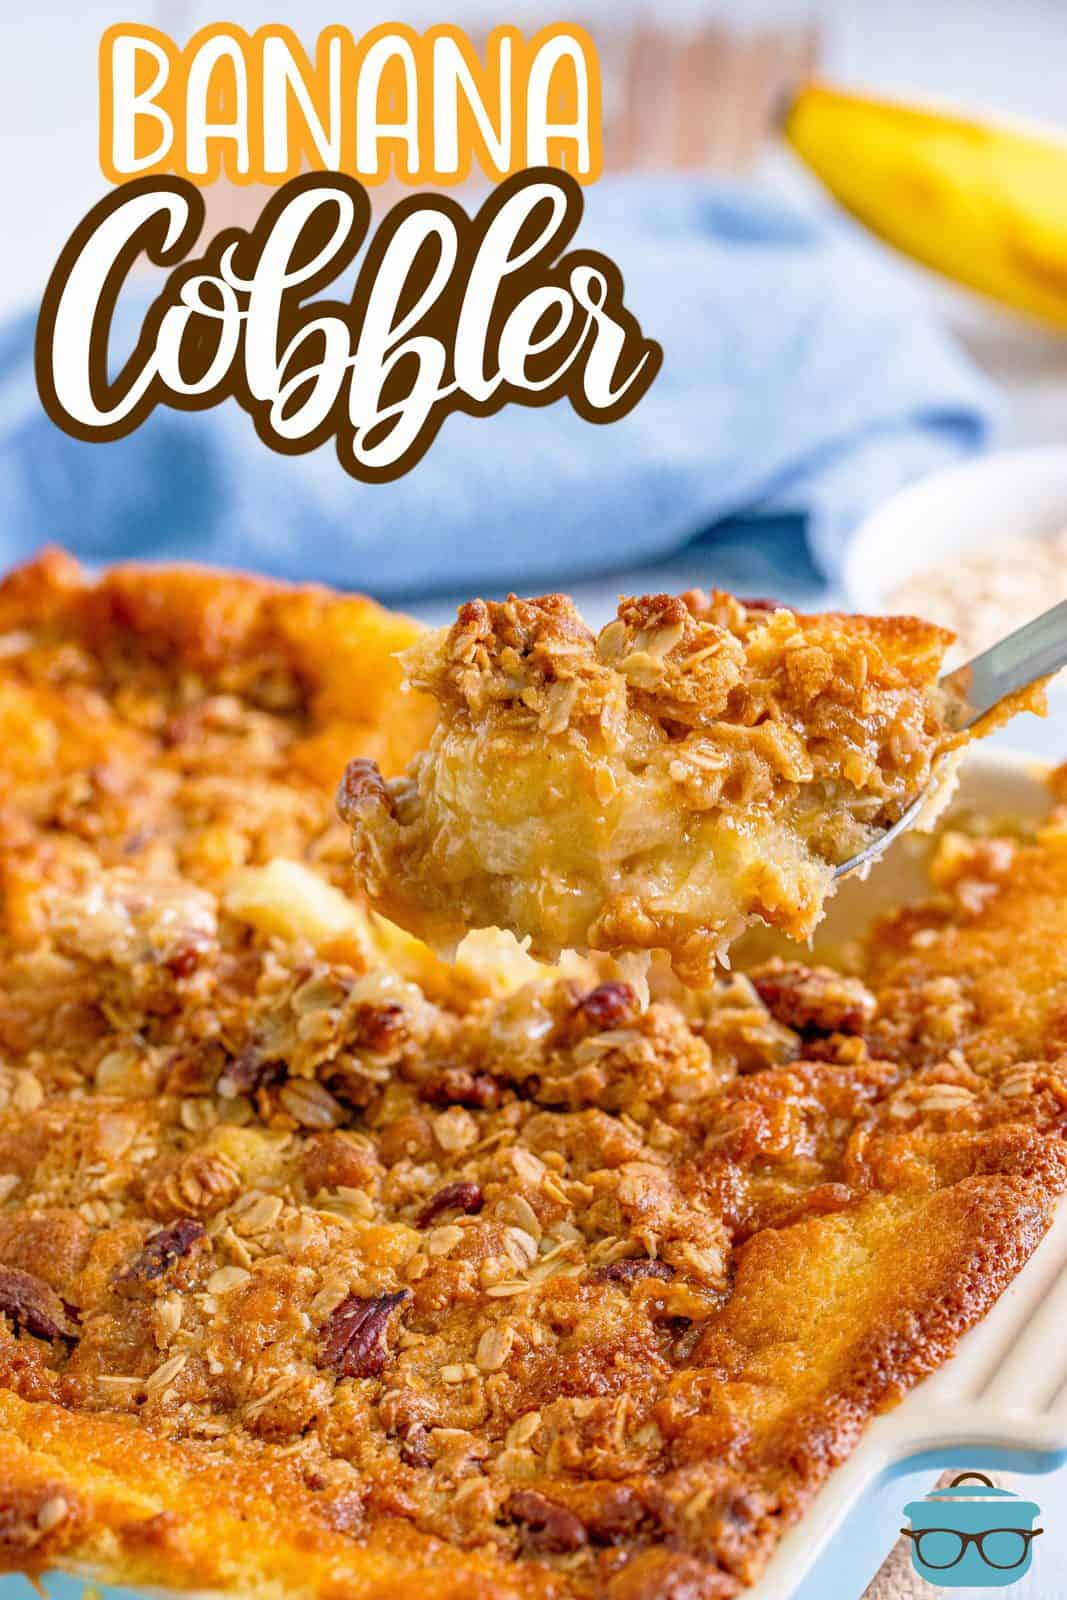 Banana Cobbler recipe from The Country Cook. Large spoon scooping out some of the cobbler from a baking dish.